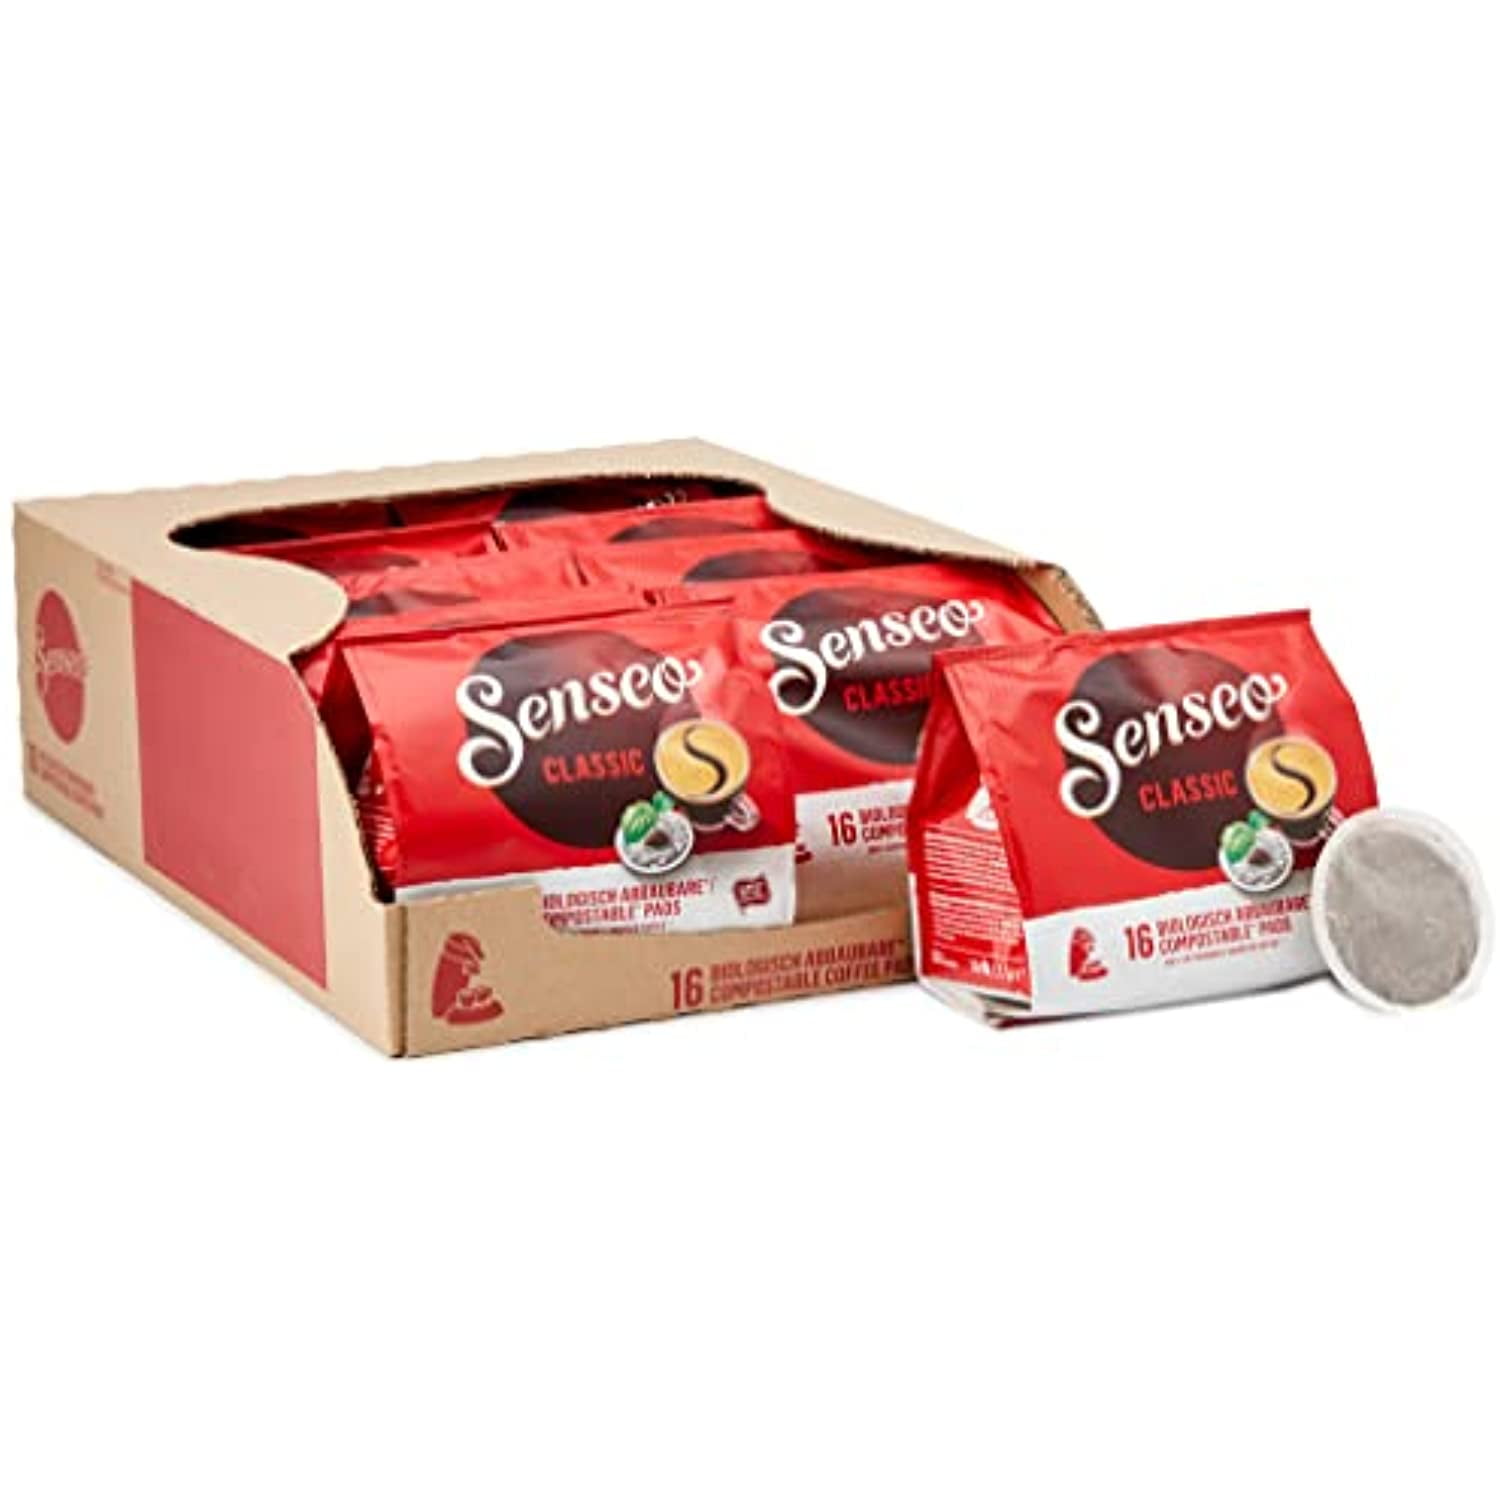 Senseo Chocolate Cappuccino Coffee Pods, 8 Count (Pack of 10) - Single  Serve Coffee Pods Bulk Pack for Senseo Coffee Machine - Compostable Coffee  Pods